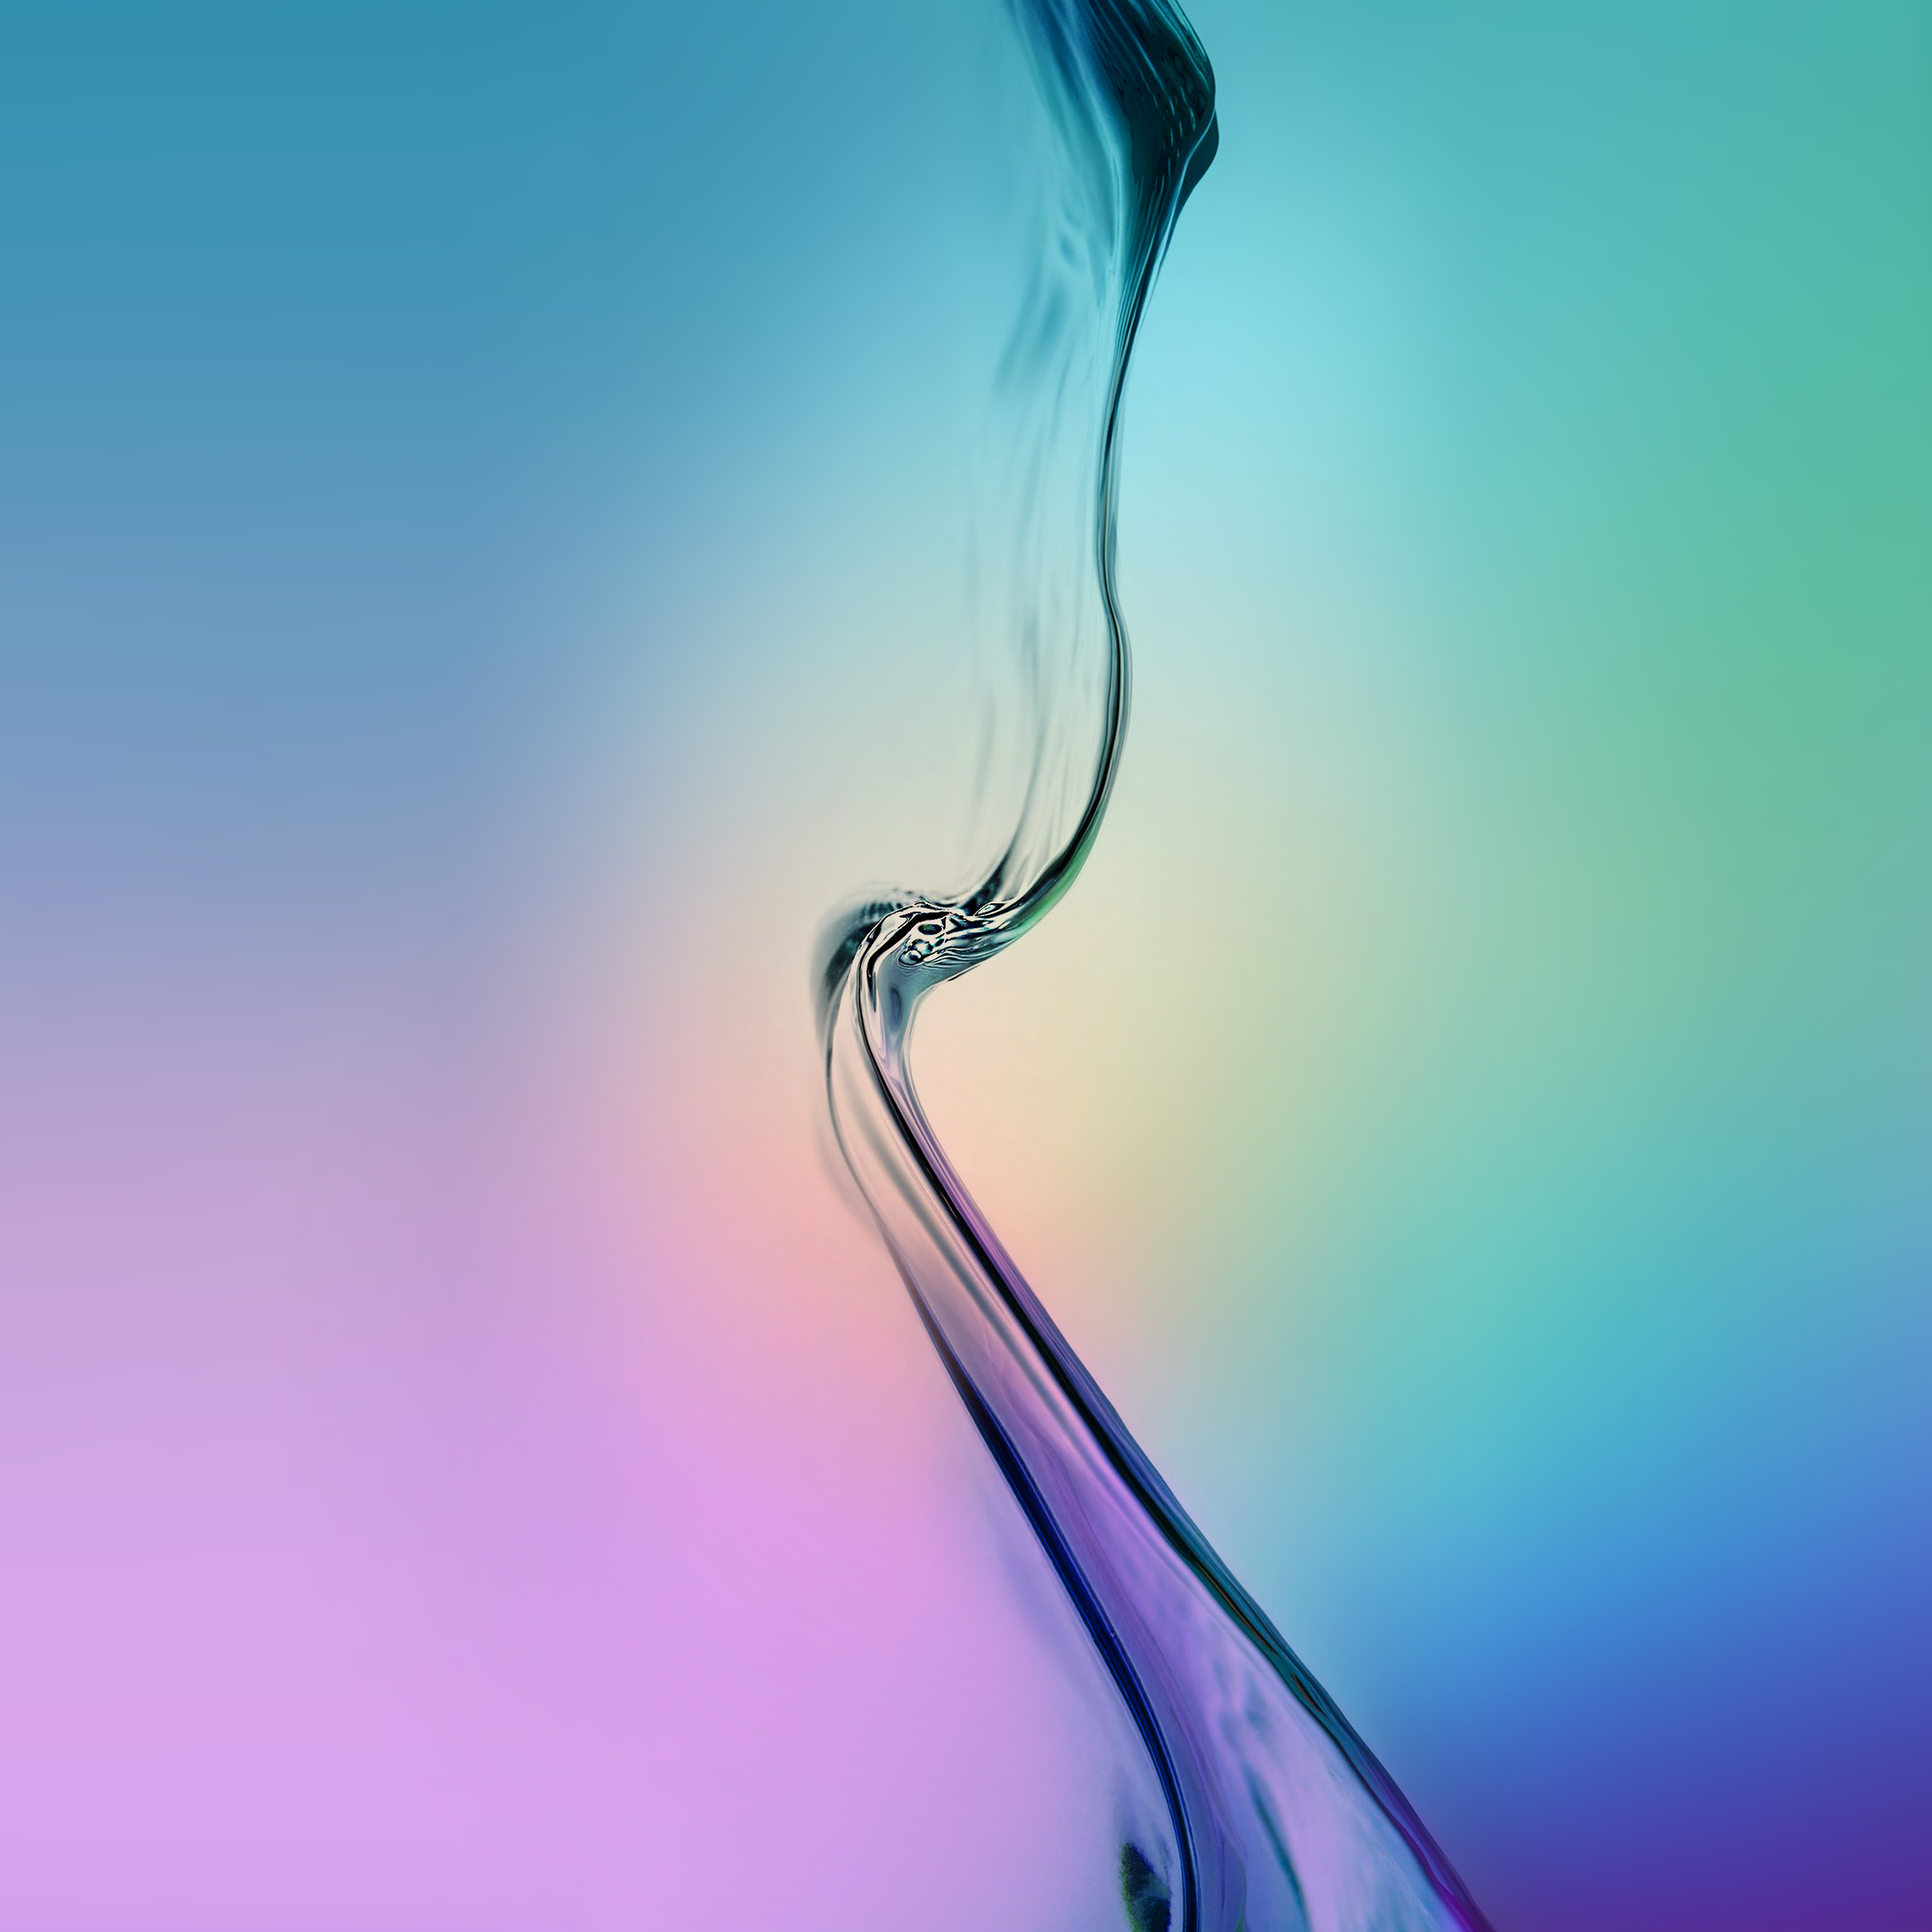 Grab Samsungs Galaxy S6 apps and wallpapers here 2240x2240